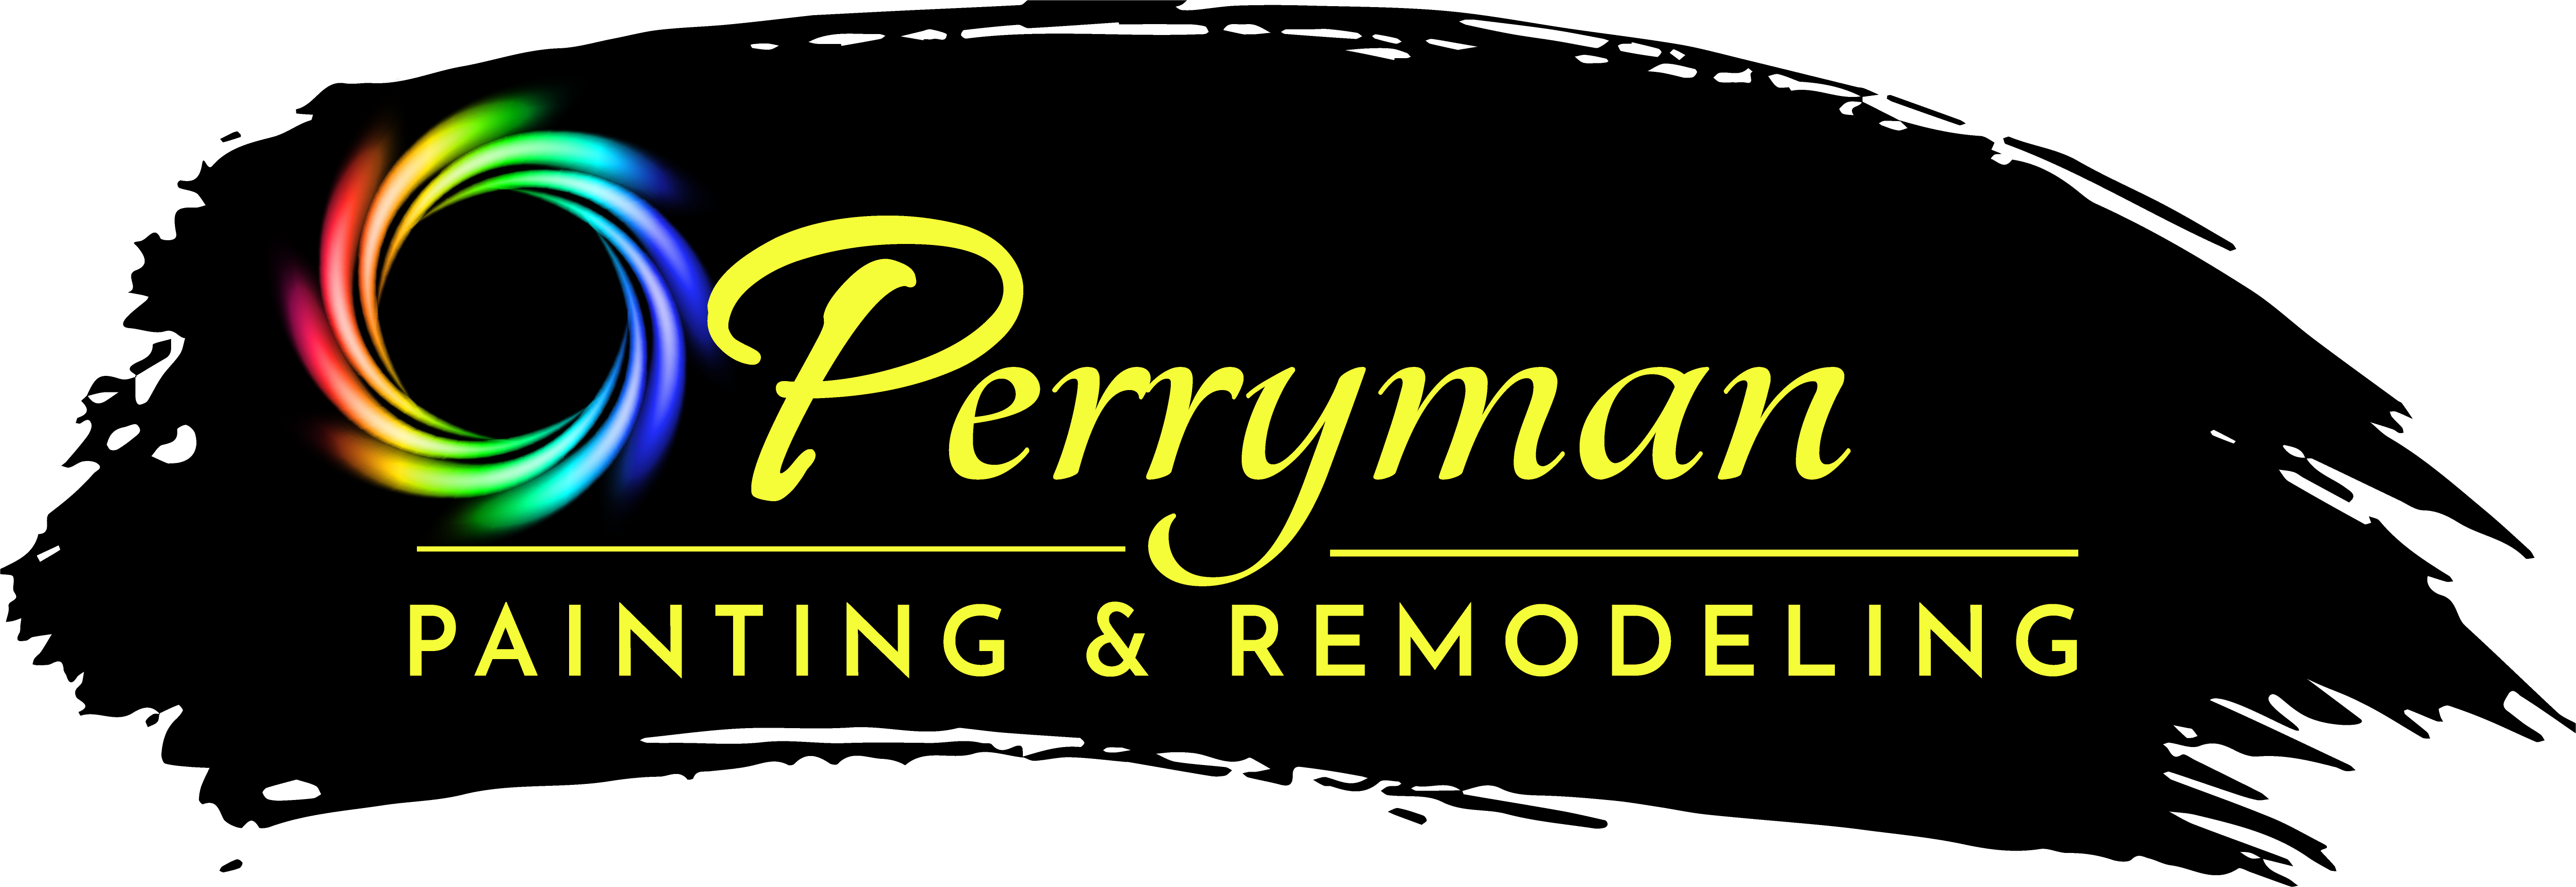 Perryman Painting & Remodeling 